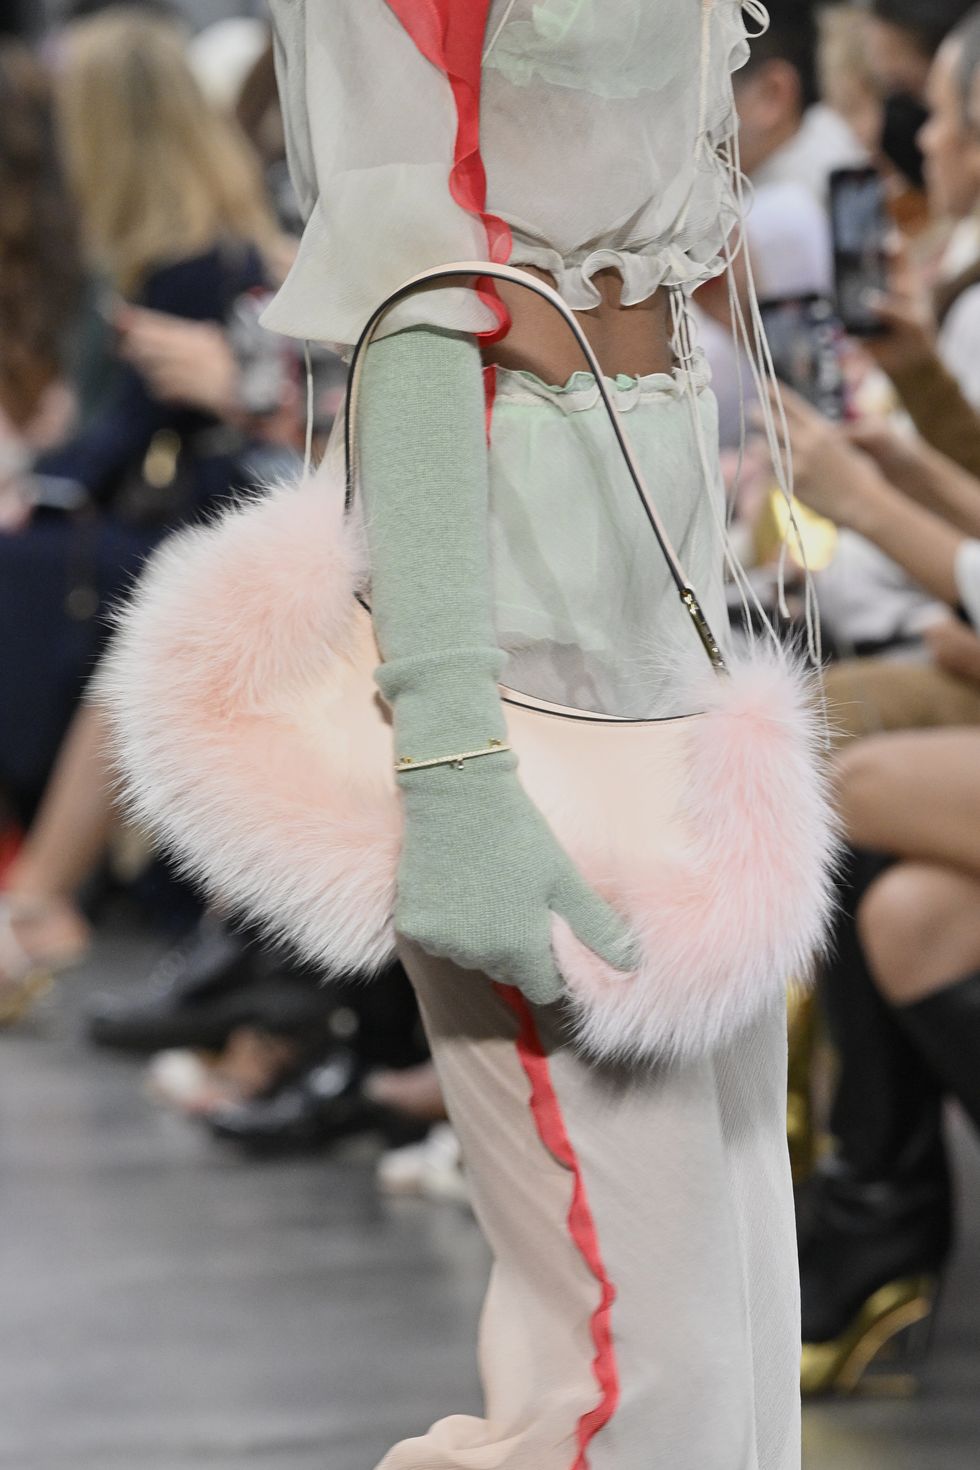 Some of the bags from the Fall Winter 2023 collection. Does anyone